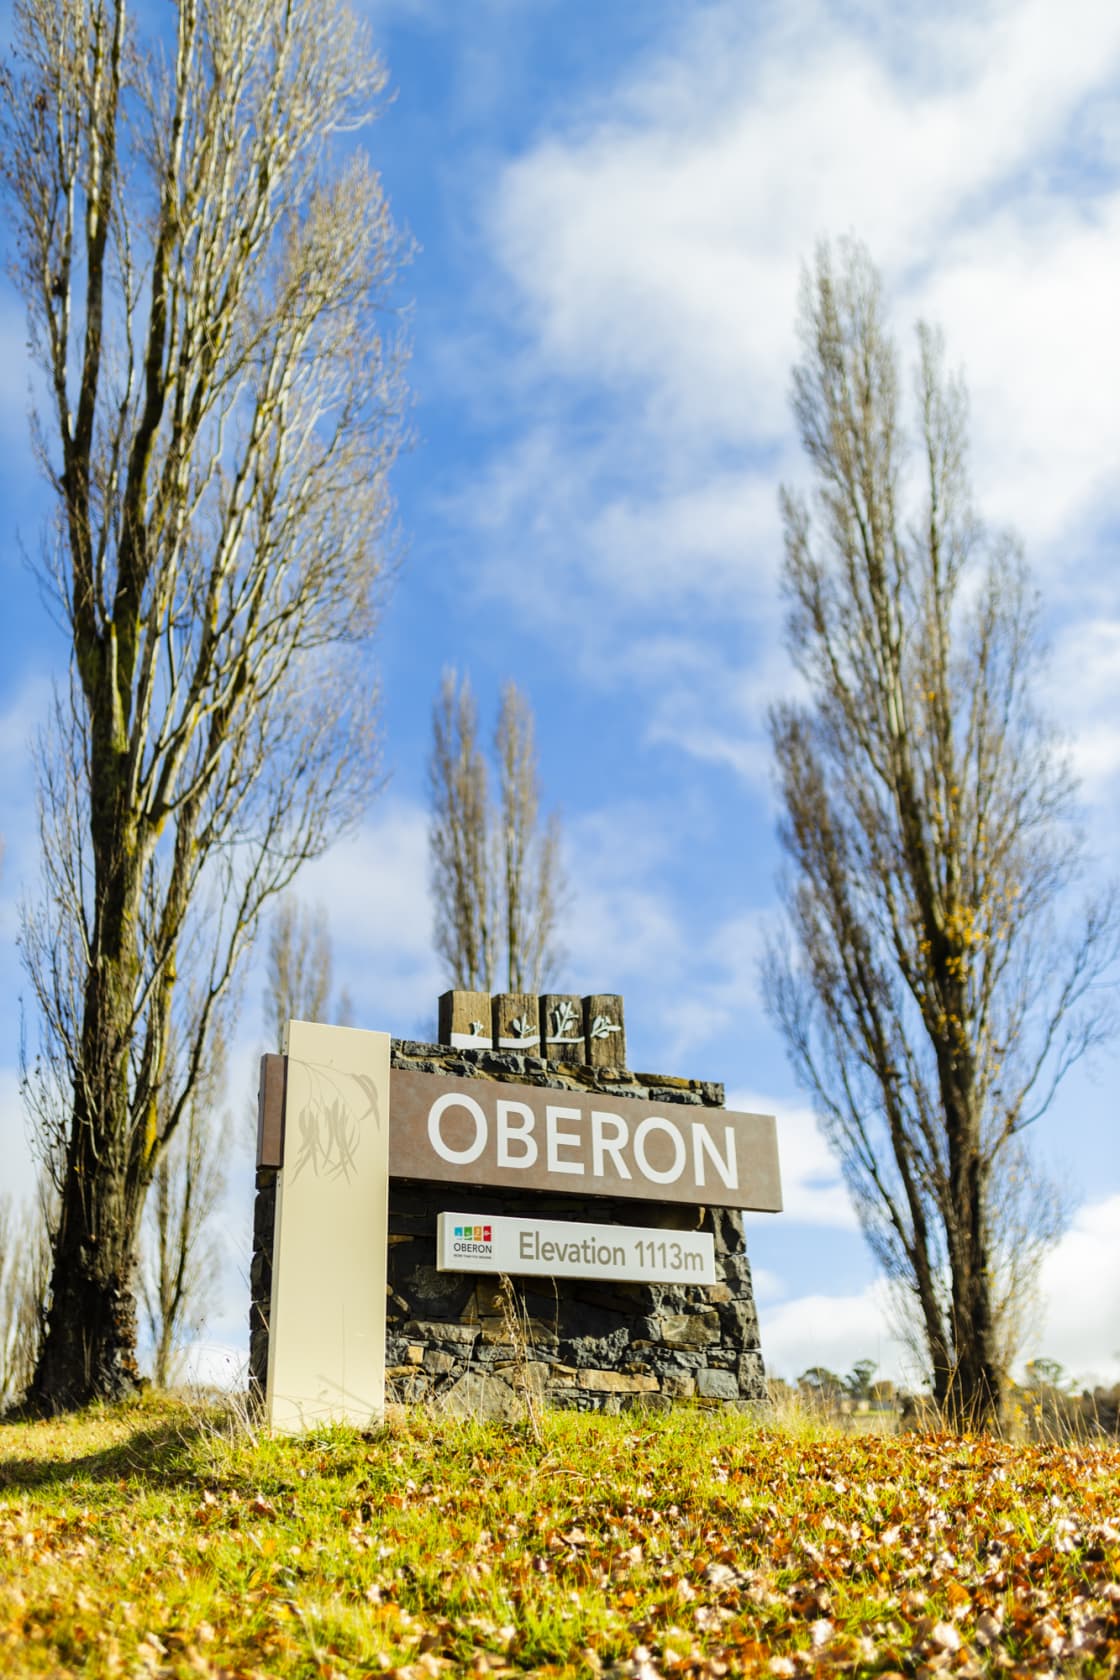 Entry to Oberon coming from the South